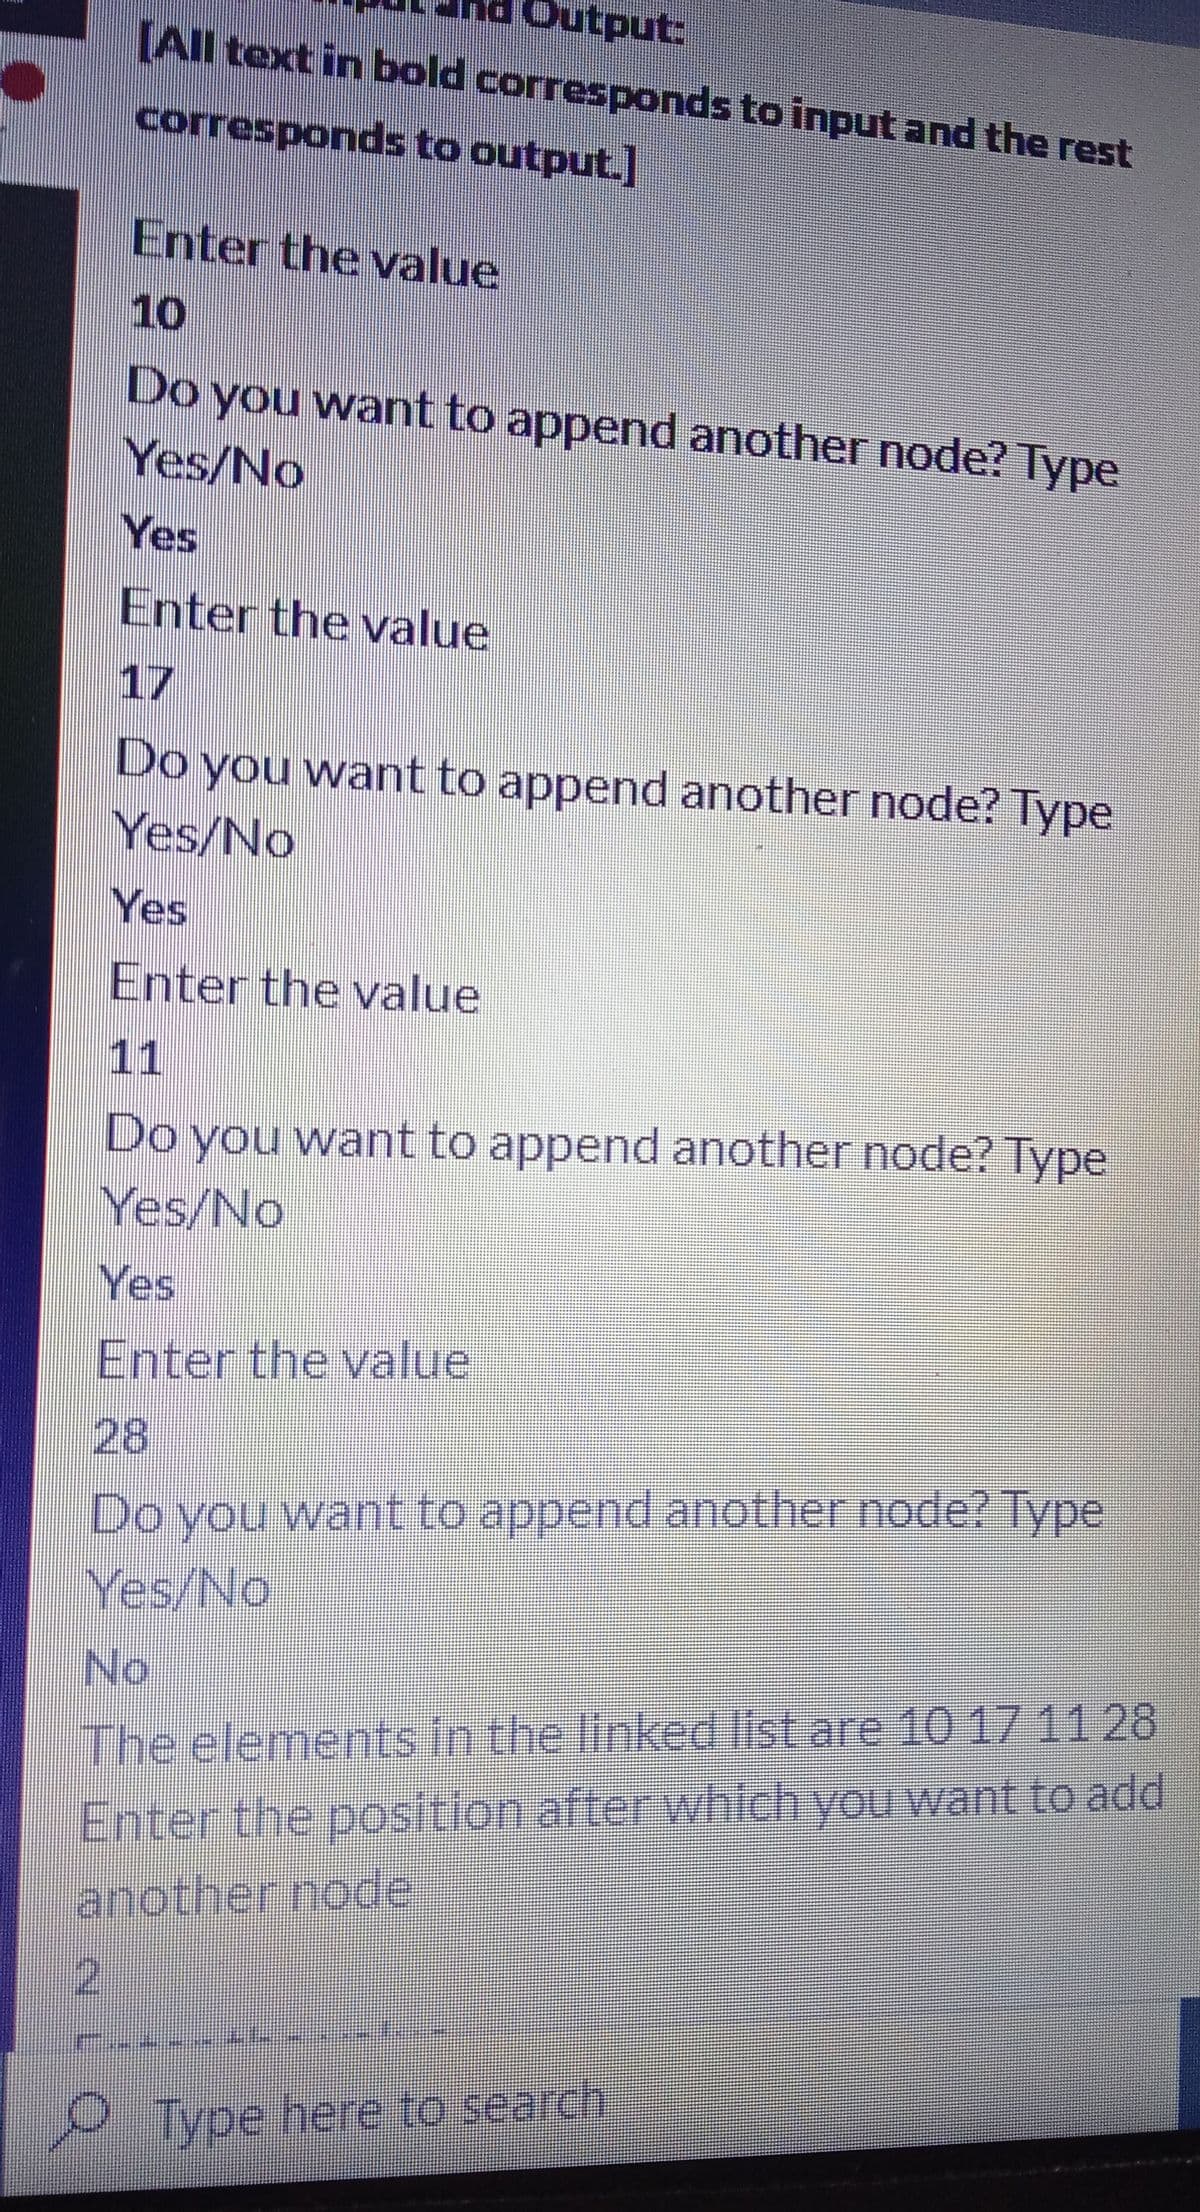 Output:
All text in bold corresponds to input and the rest
corresponds to output.]
Enter the value
10
Do you want to append another node? Type
Yes/No
Yes
Enter the value
17
Do
you want to append another node? Type
Yes/No
Yes
Enter the value
11
Do you want to append another node? Type
Yes/No
Yes
Enter the value
28
Do you want to append another node? Type
Yes/No
No
The elements in the linked list are 10 1711 28
Enter the position after which you wantto add
another node
2.
Type here to search
